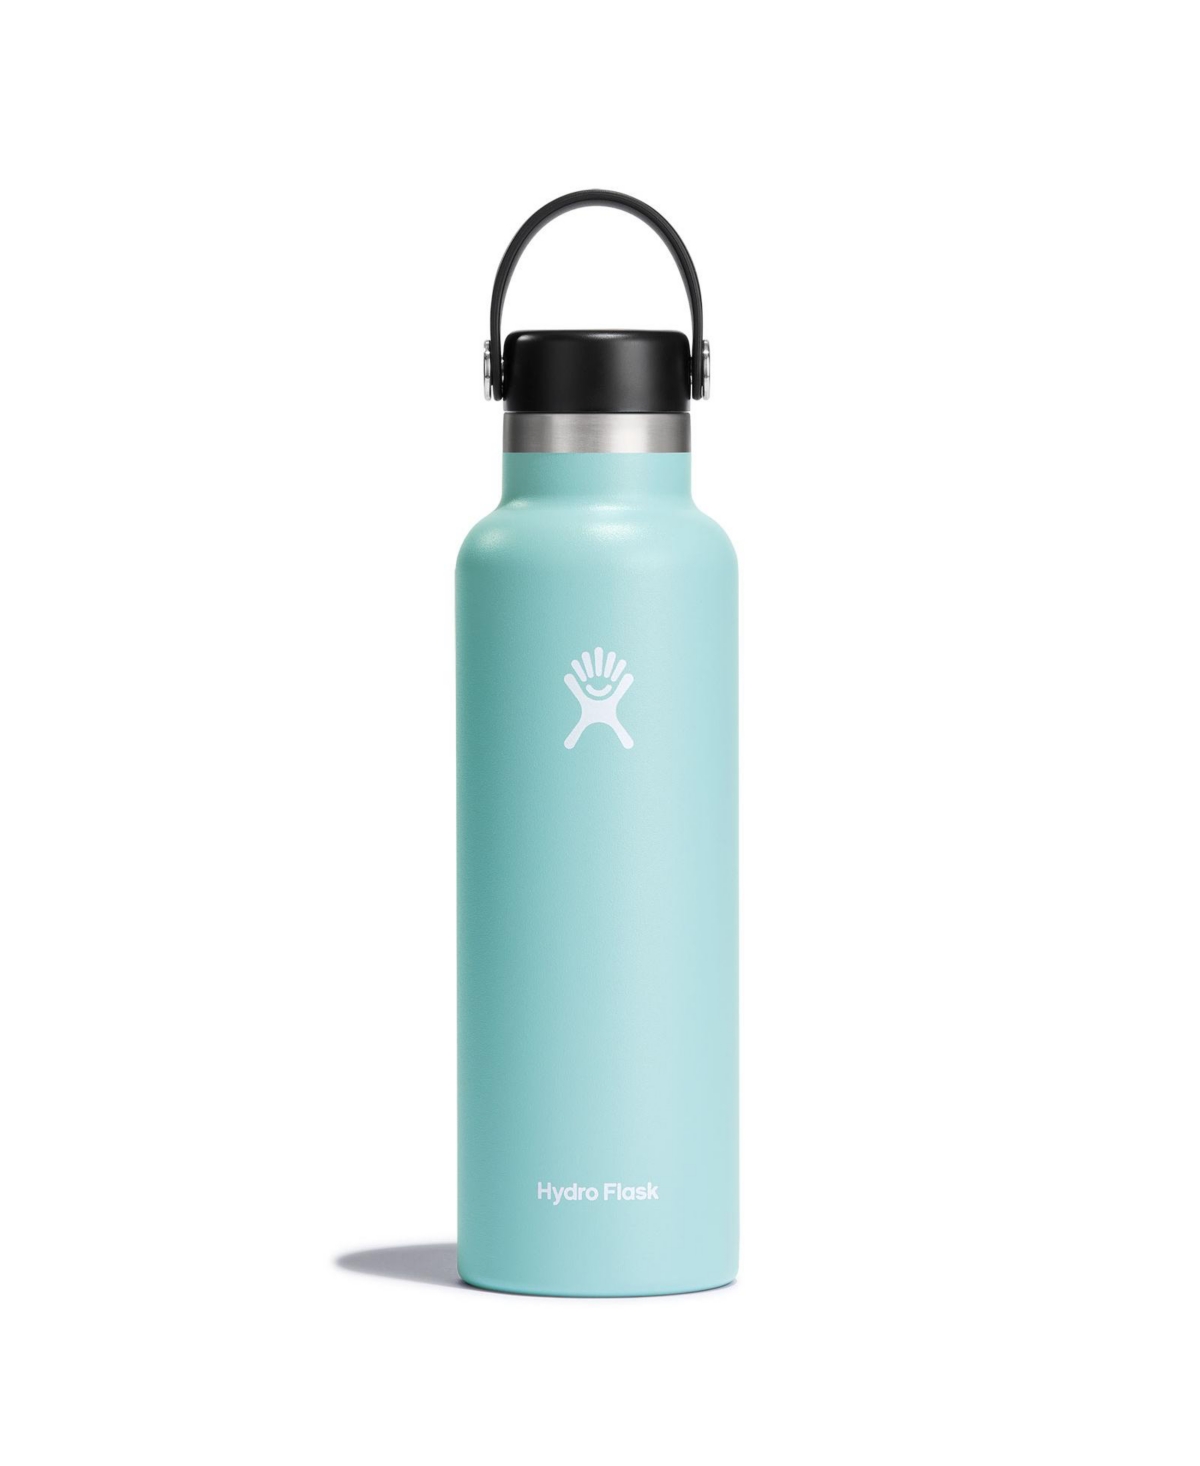 Hydro Flask Standard Mouth Insulated Bottle In Slate Blue